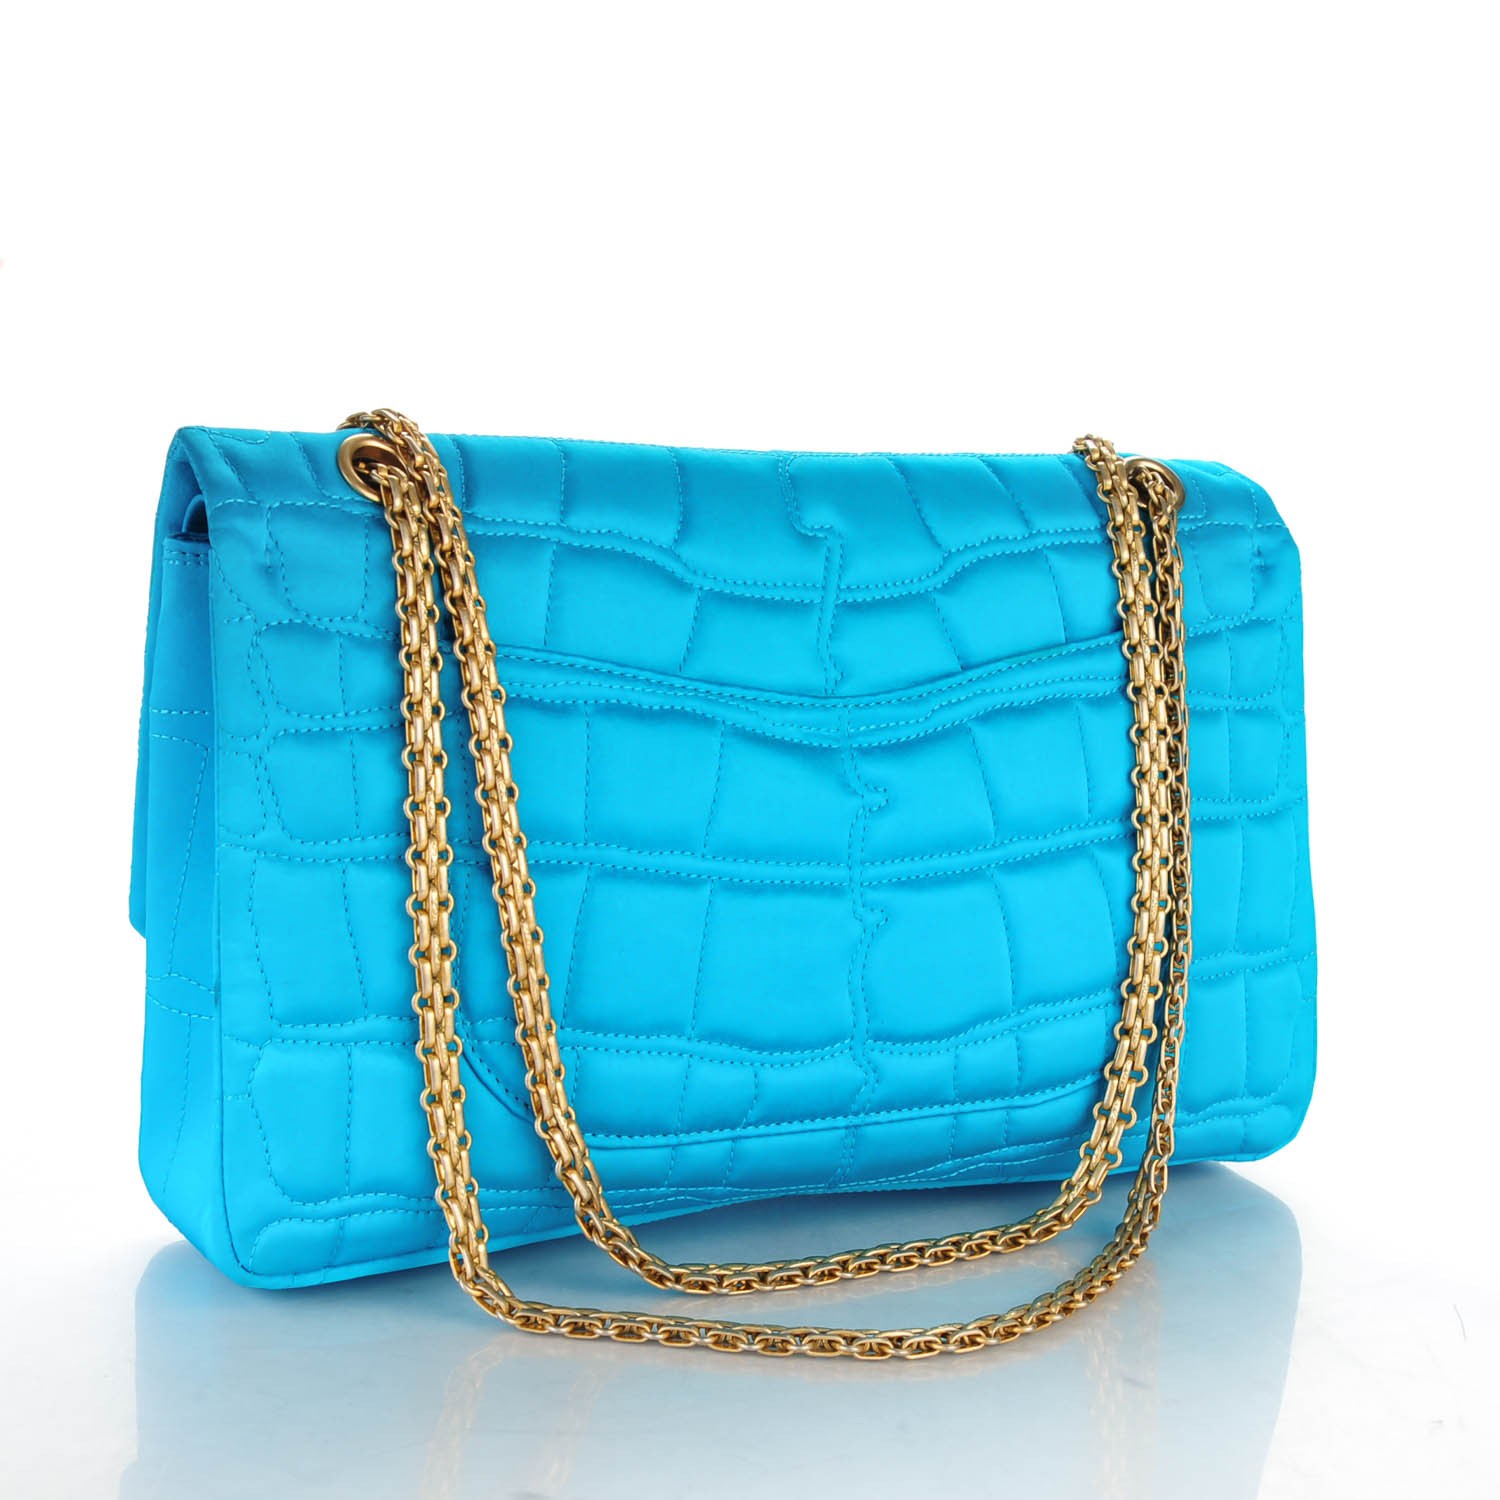 CHANEL Satin Coco's Croc 2.55 Reissue 227 Flap Turquoise 151900